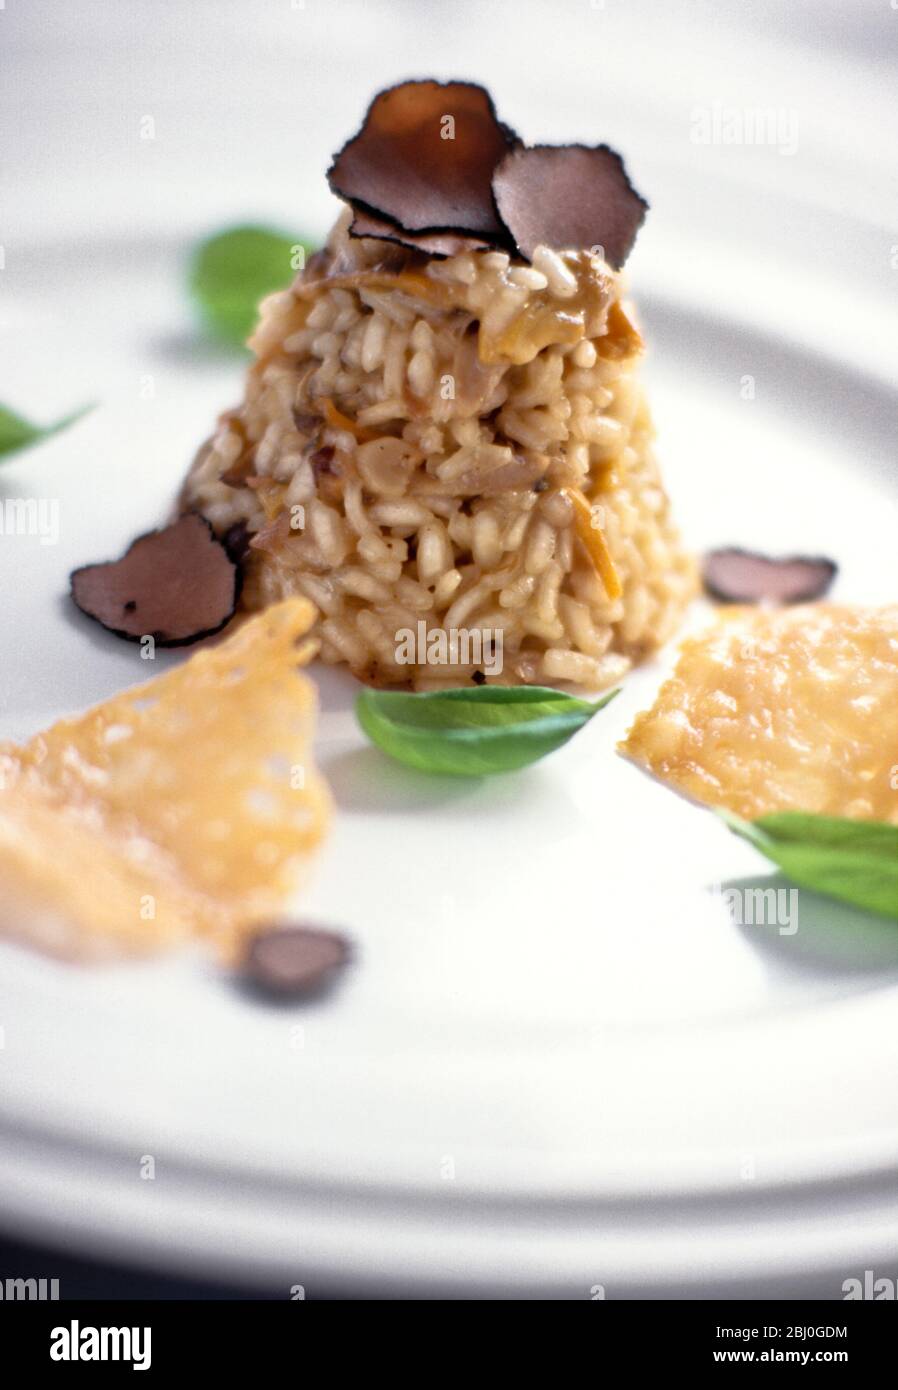 Mushroom risotto served as a pyramid with basil leaves and shavings of parmesan and black truffles on white plate - Stock Photo